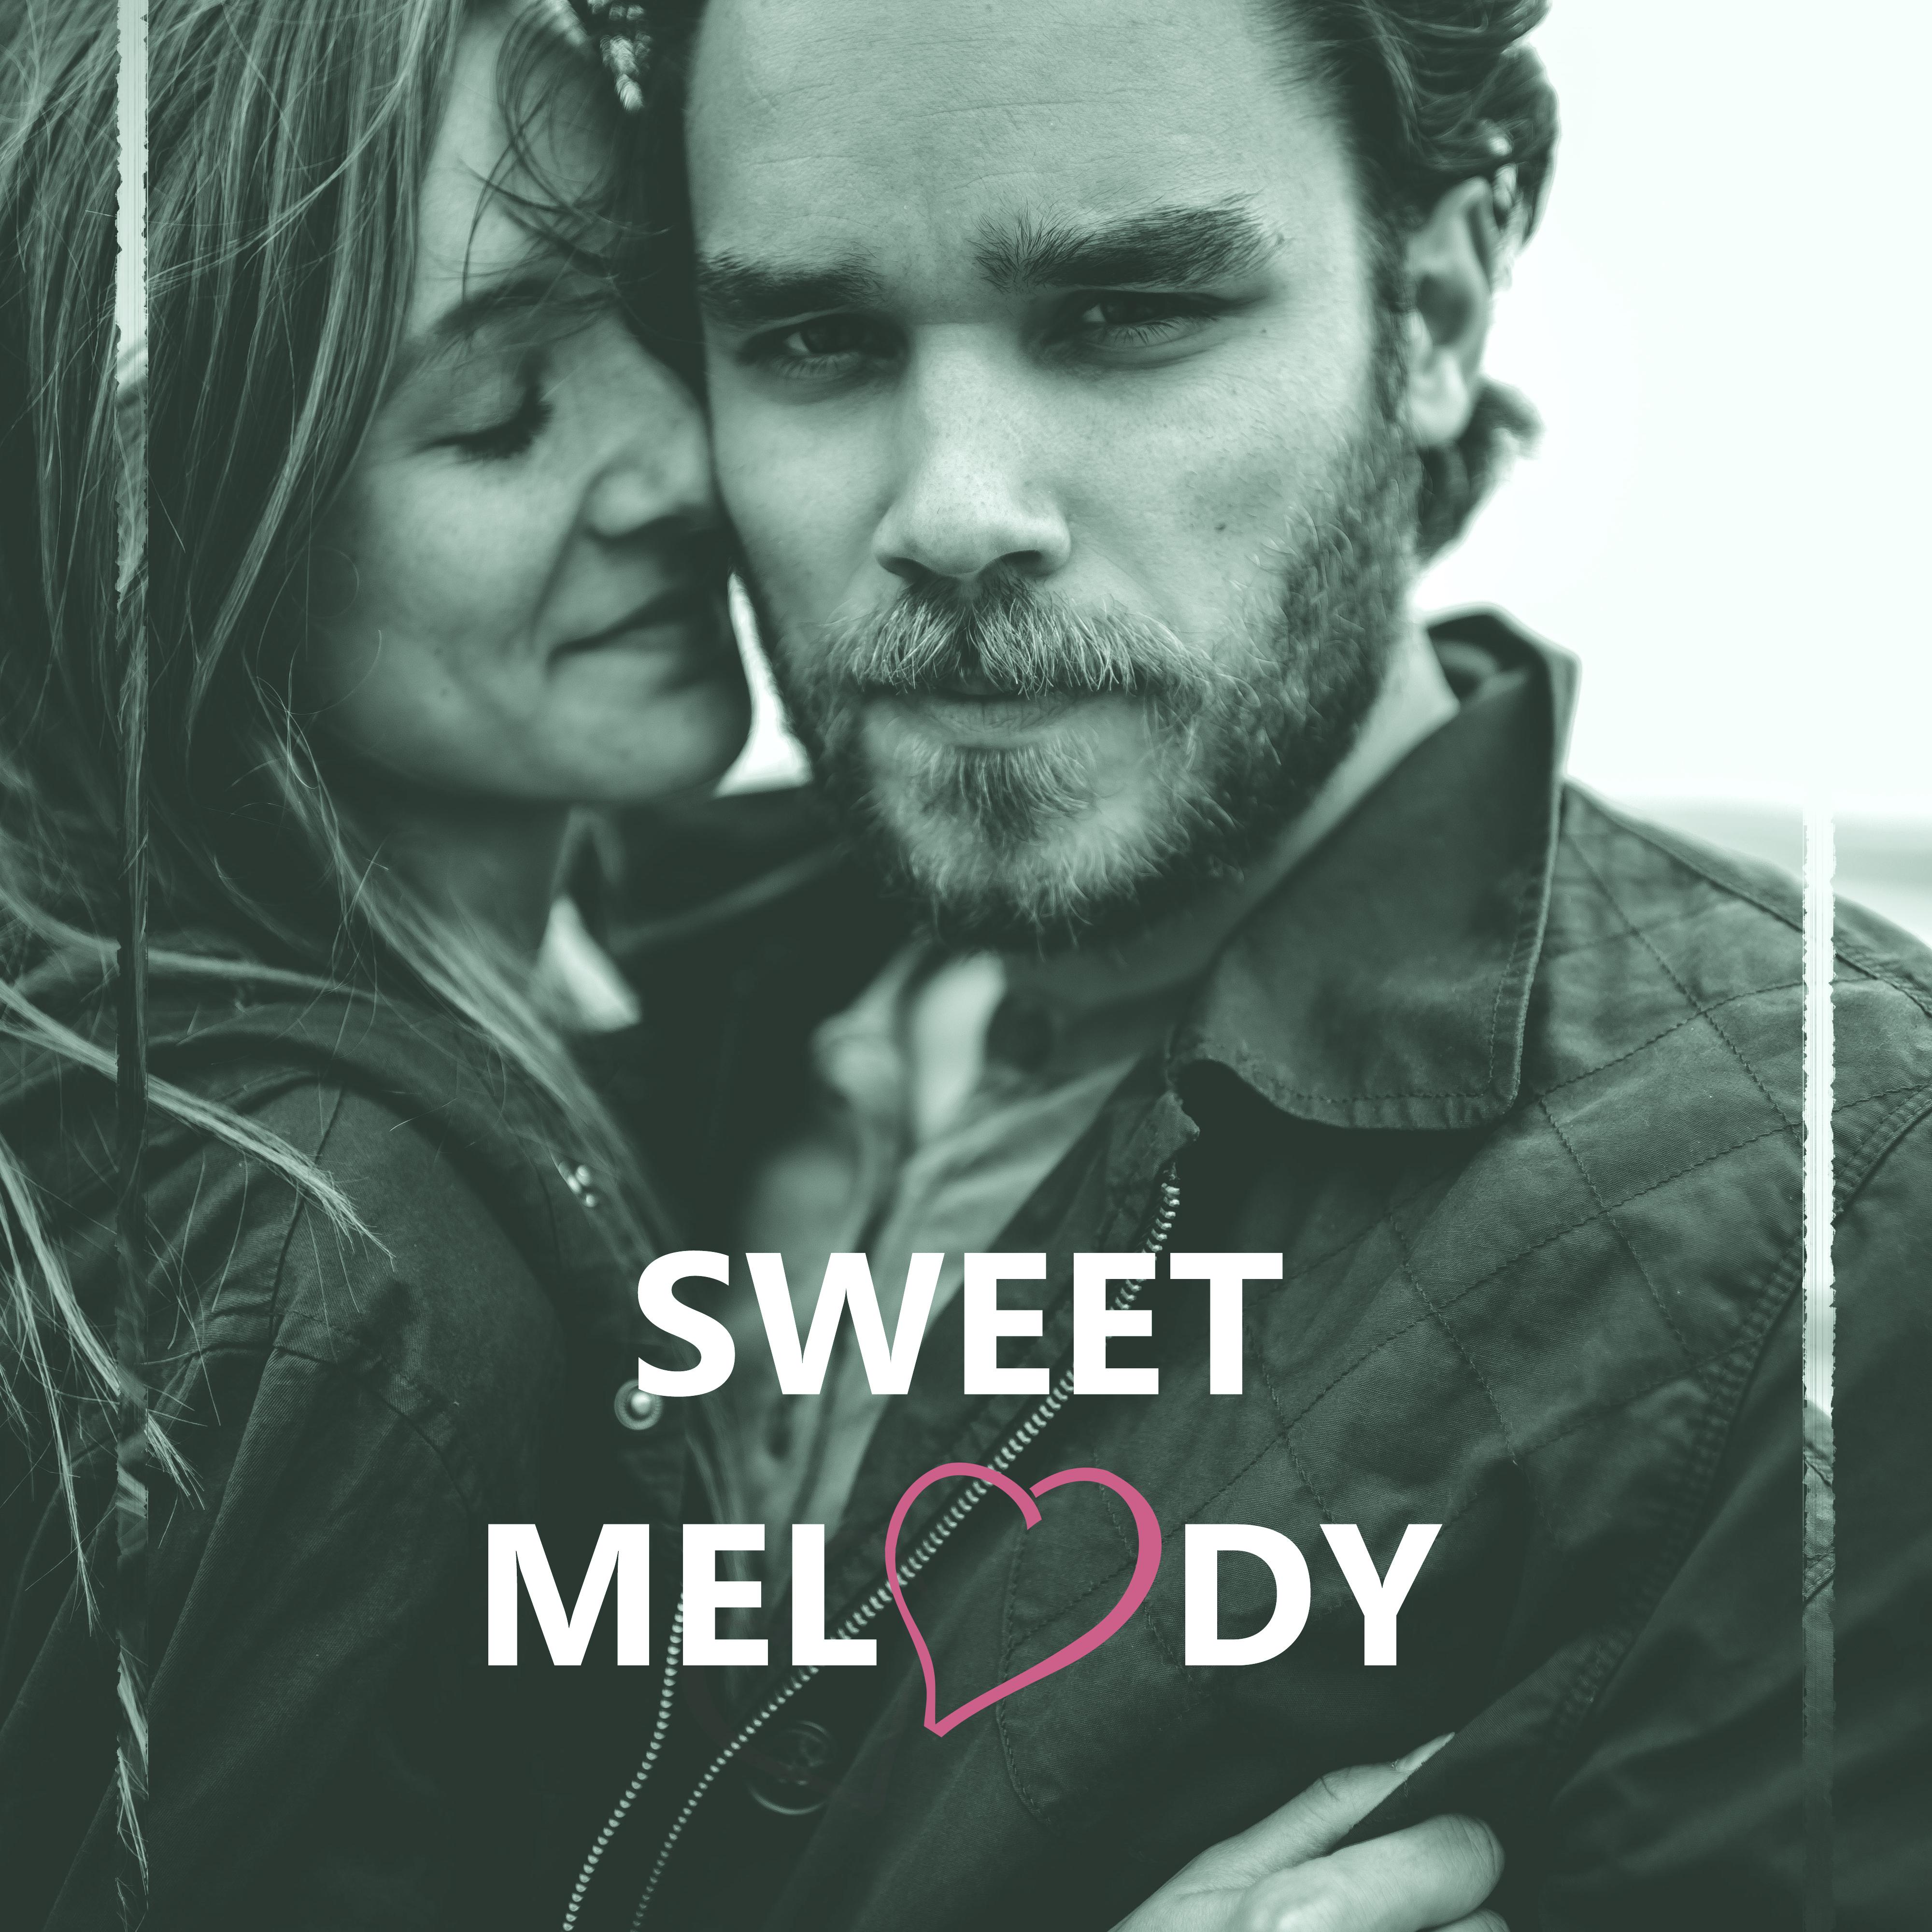 Sweet Melody  Dreamy, Passion, Youth, , Sensitive, Tenderness, Poem, Nice Sound